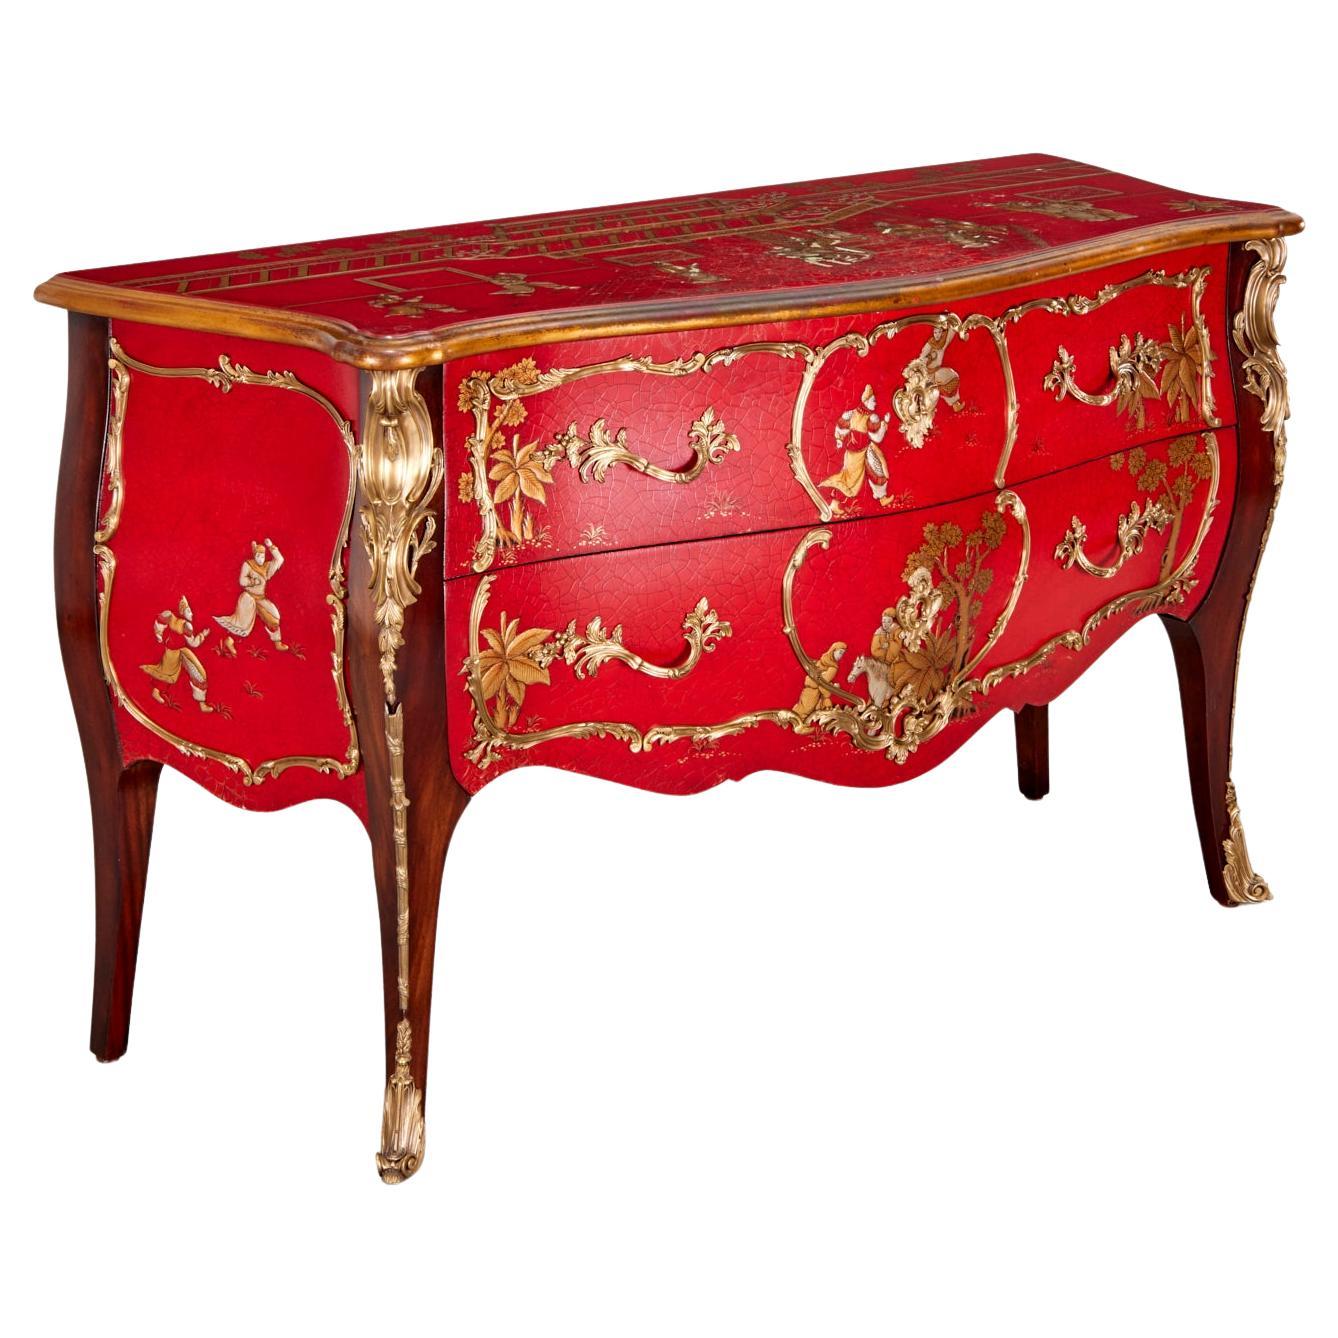 21st C.Theodore Alexander, 'The Opulent East' Red Lacquer Serpentine Bombe Chest For Sale